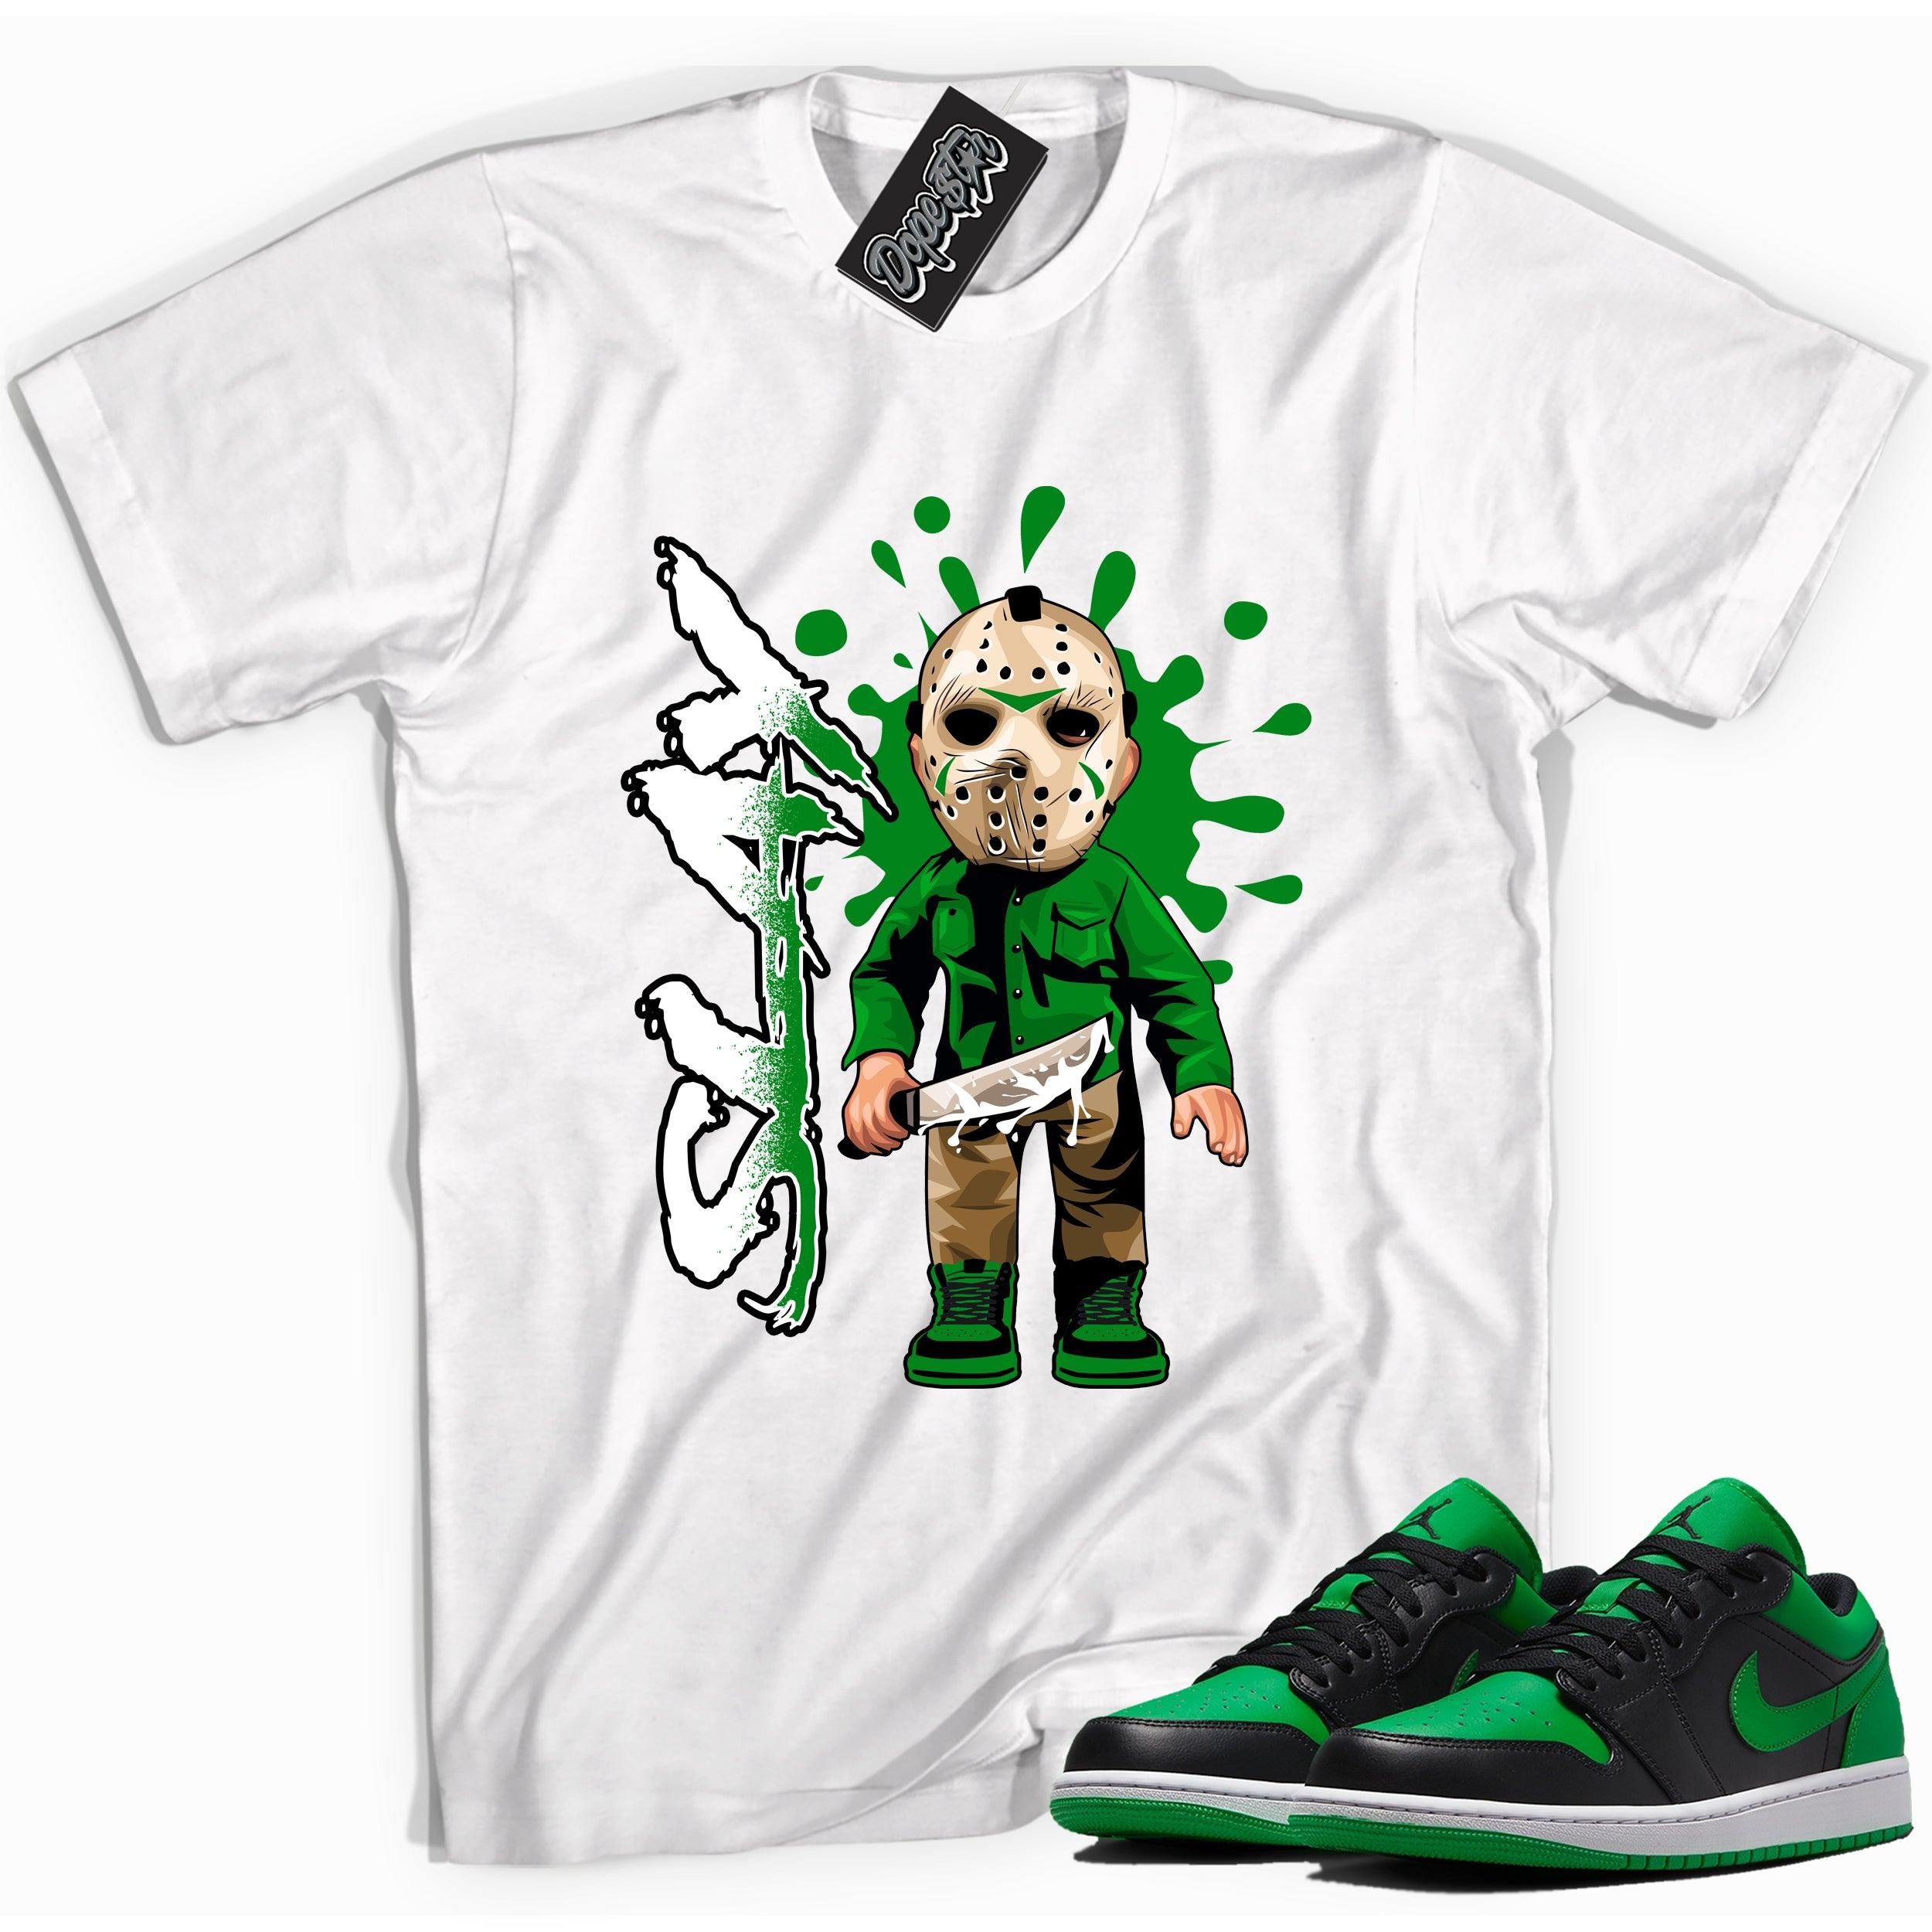 Cool white graphic tee with 'slay' print, that perfectly matches Air Jordan 1 Low Lucky Green sneakers